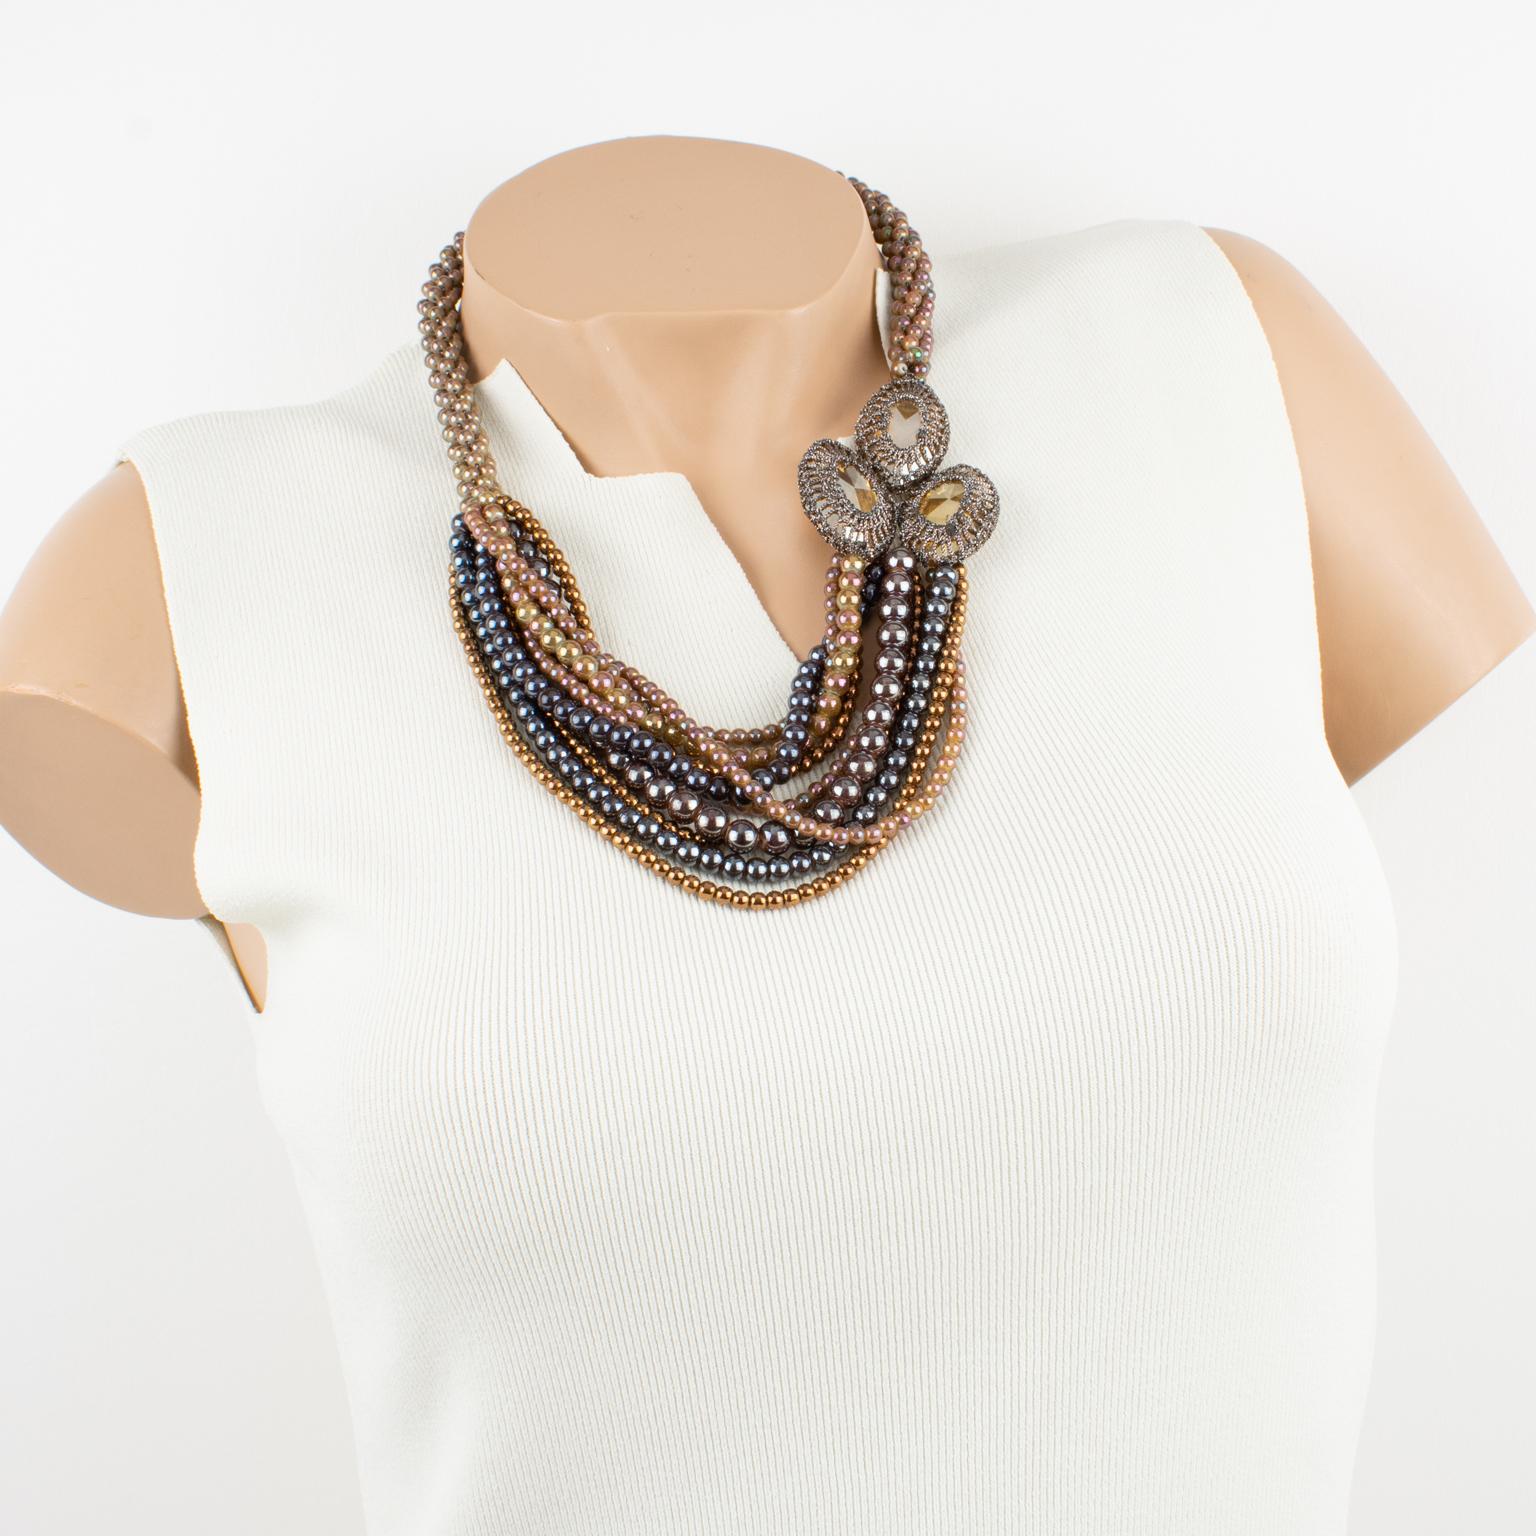 Angela Caputi designed this ultra-chic choker necklace in Italy. The multi-strand design boasts pearl-like beads and a large side medallion. This unusual pattern is built with pearl-like glass beads in golden brown, gunmetal, and antique rose